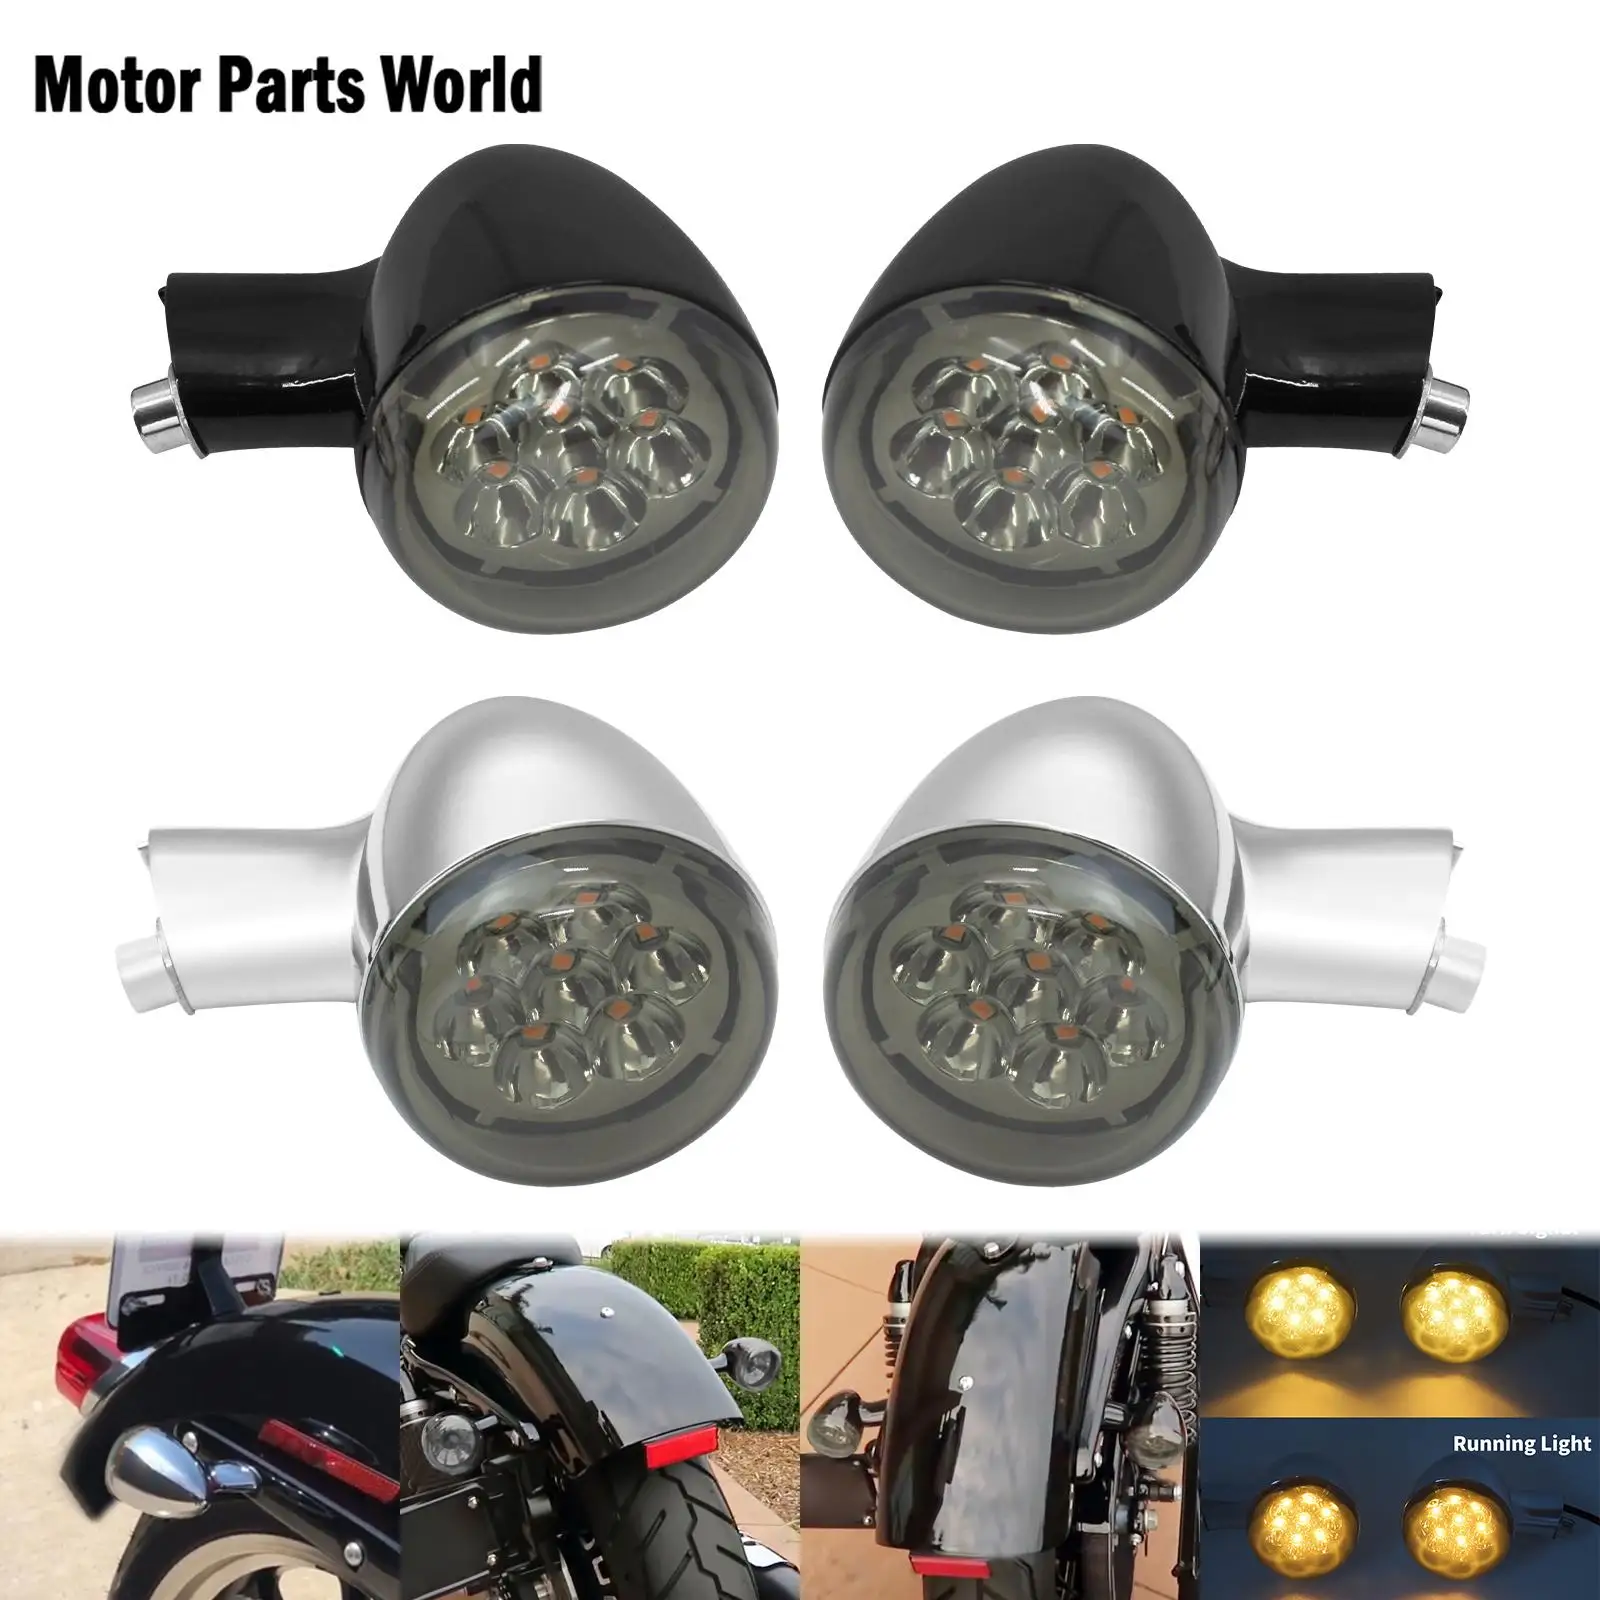 

Motorcycle Rear Amber Turn Signals Lights Short Bracket W/ Lens For Harley Sportster 883 Iron XL1200 Forty Eight Roadster 92-Up